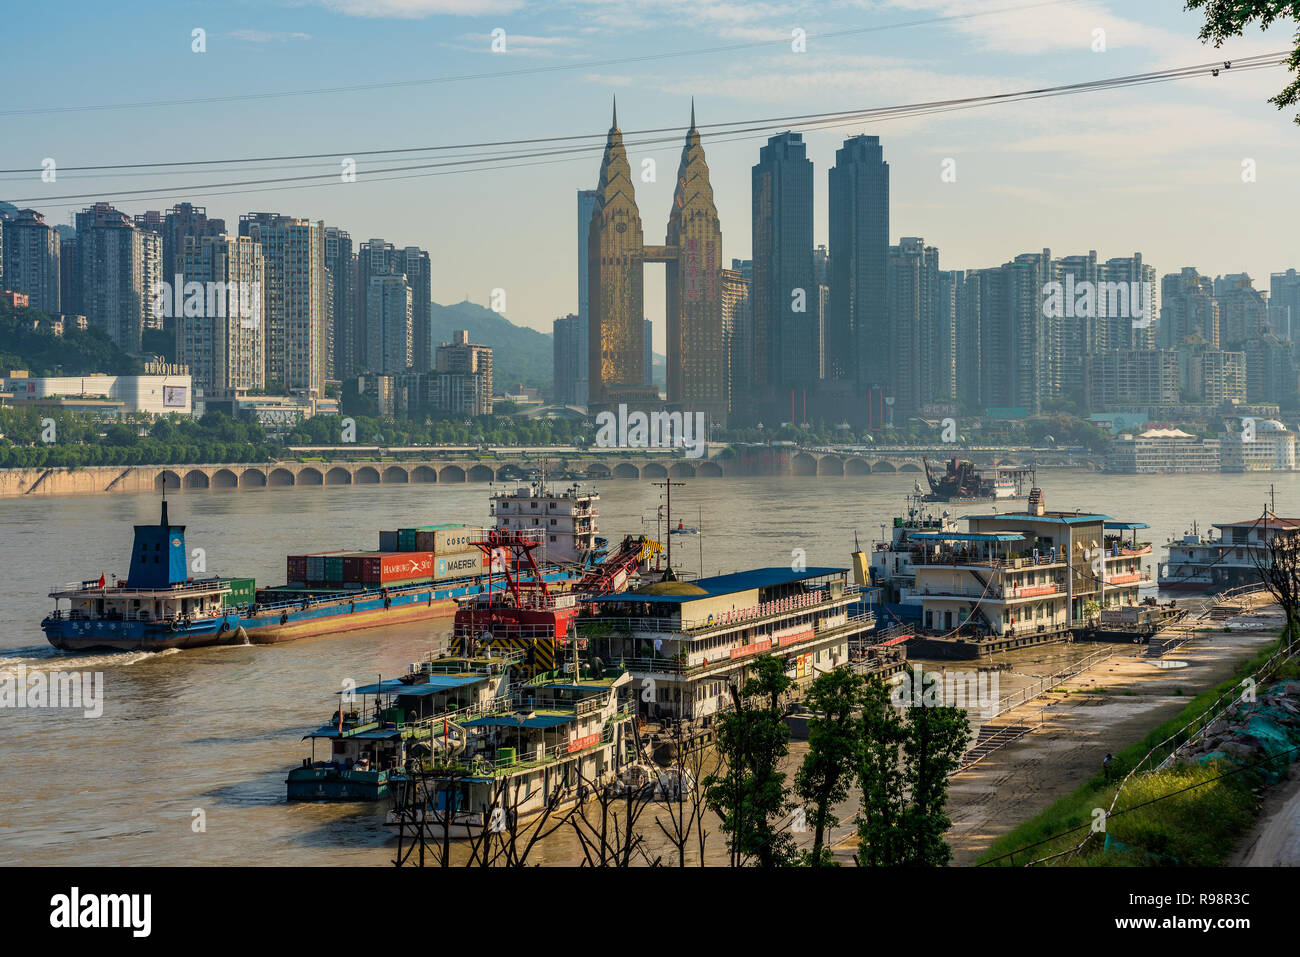 CHONGQING, CHINA - SEPTEMBER 19: Yangtze River view of city buildings and boats near the Chaotianmen docks on September 19, 2018 in Chongqing Stock Photo